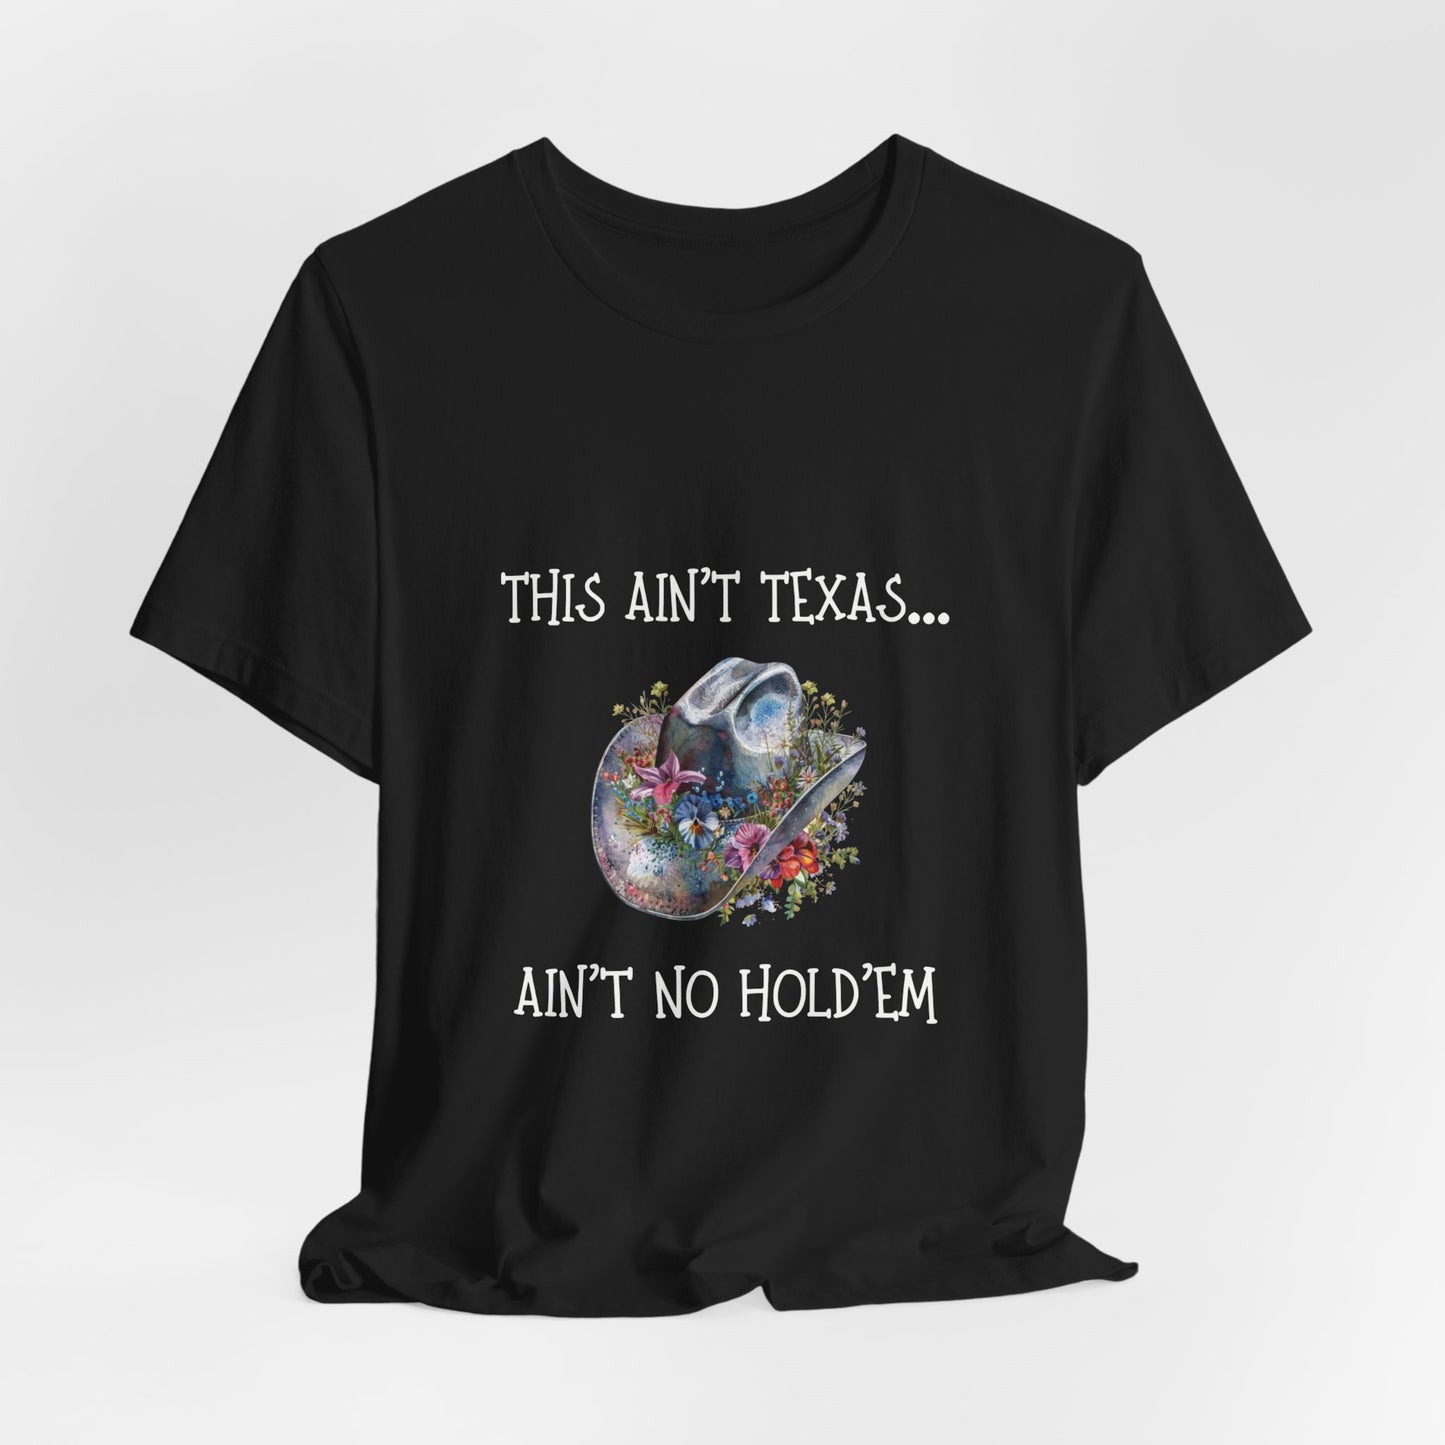 AIN'T NO HOLD'EM Graphic, Cowboy Carter Inspired, Fan Art, Cowgirl Hat Graphic, Rodeo Shirt, Country Shirt, Cowgirl T-shirt, Country Concert Tee, Western Graphic Tee for Women, Western Tee, Gift for Her, Mother's Day. Gift, Unisex Jersey Short Sleeve Tee